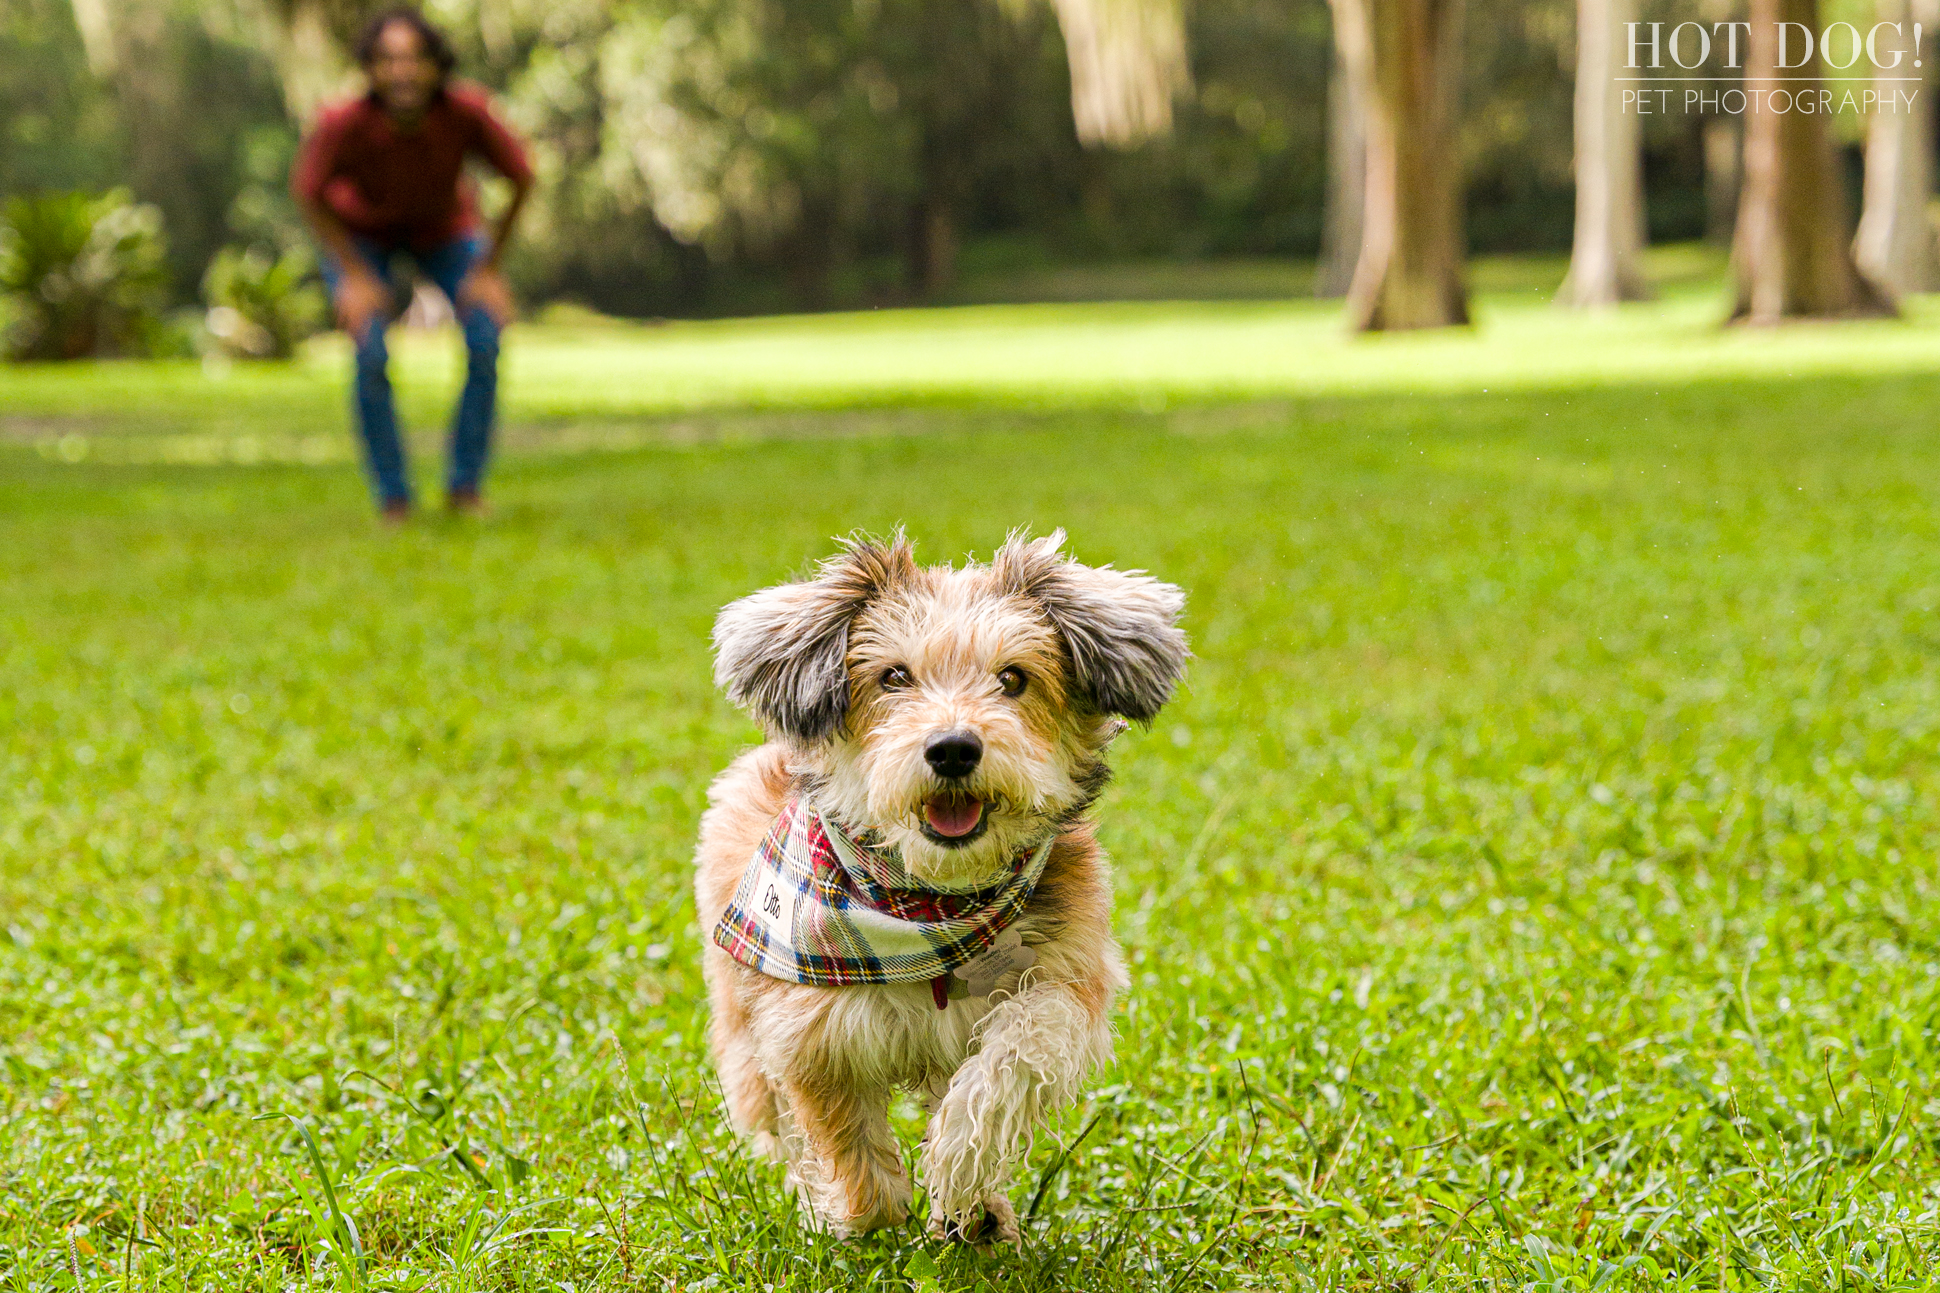 Capture the special moments with your furry friend at Hot Dog! Pet Photography, the best pet photography studio in Central Florida.